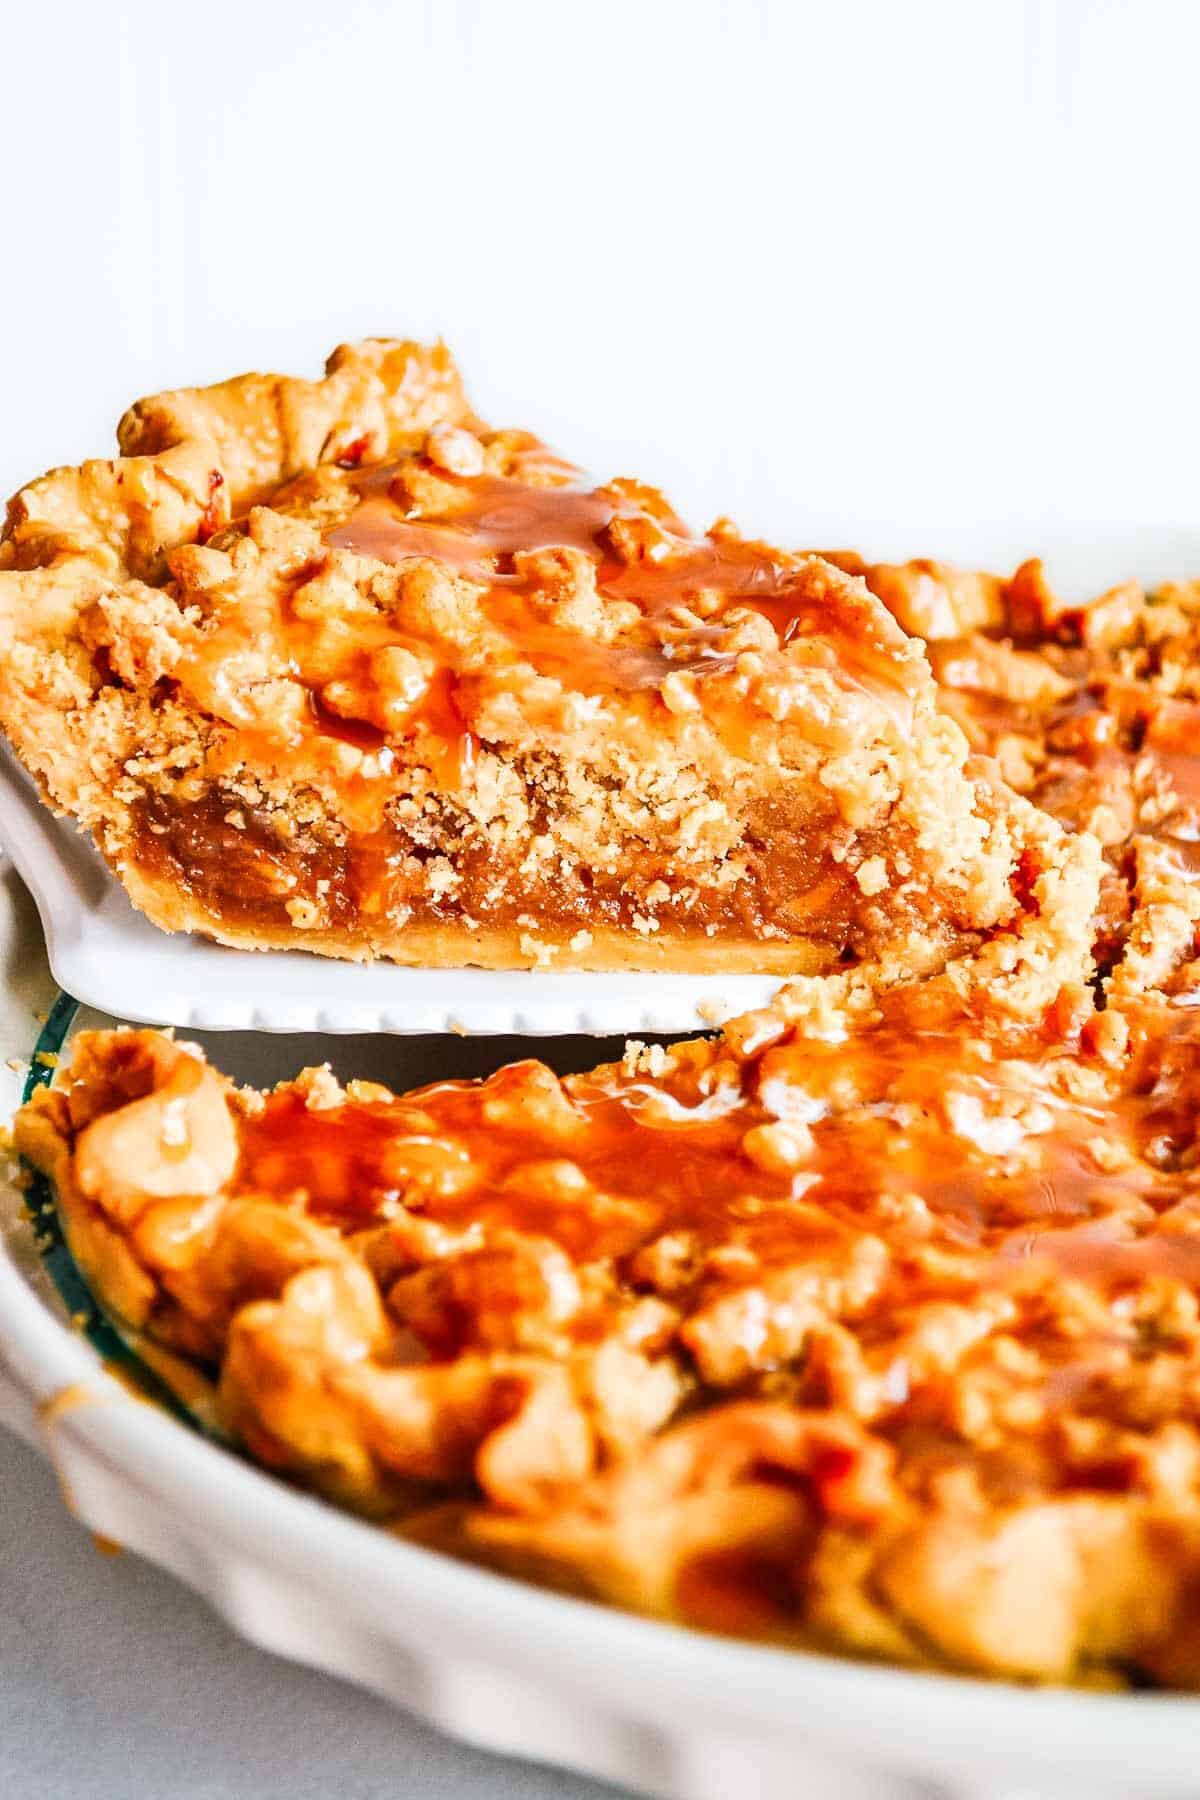 A large piece of caramel apple pie with crumb topping on a pie server.